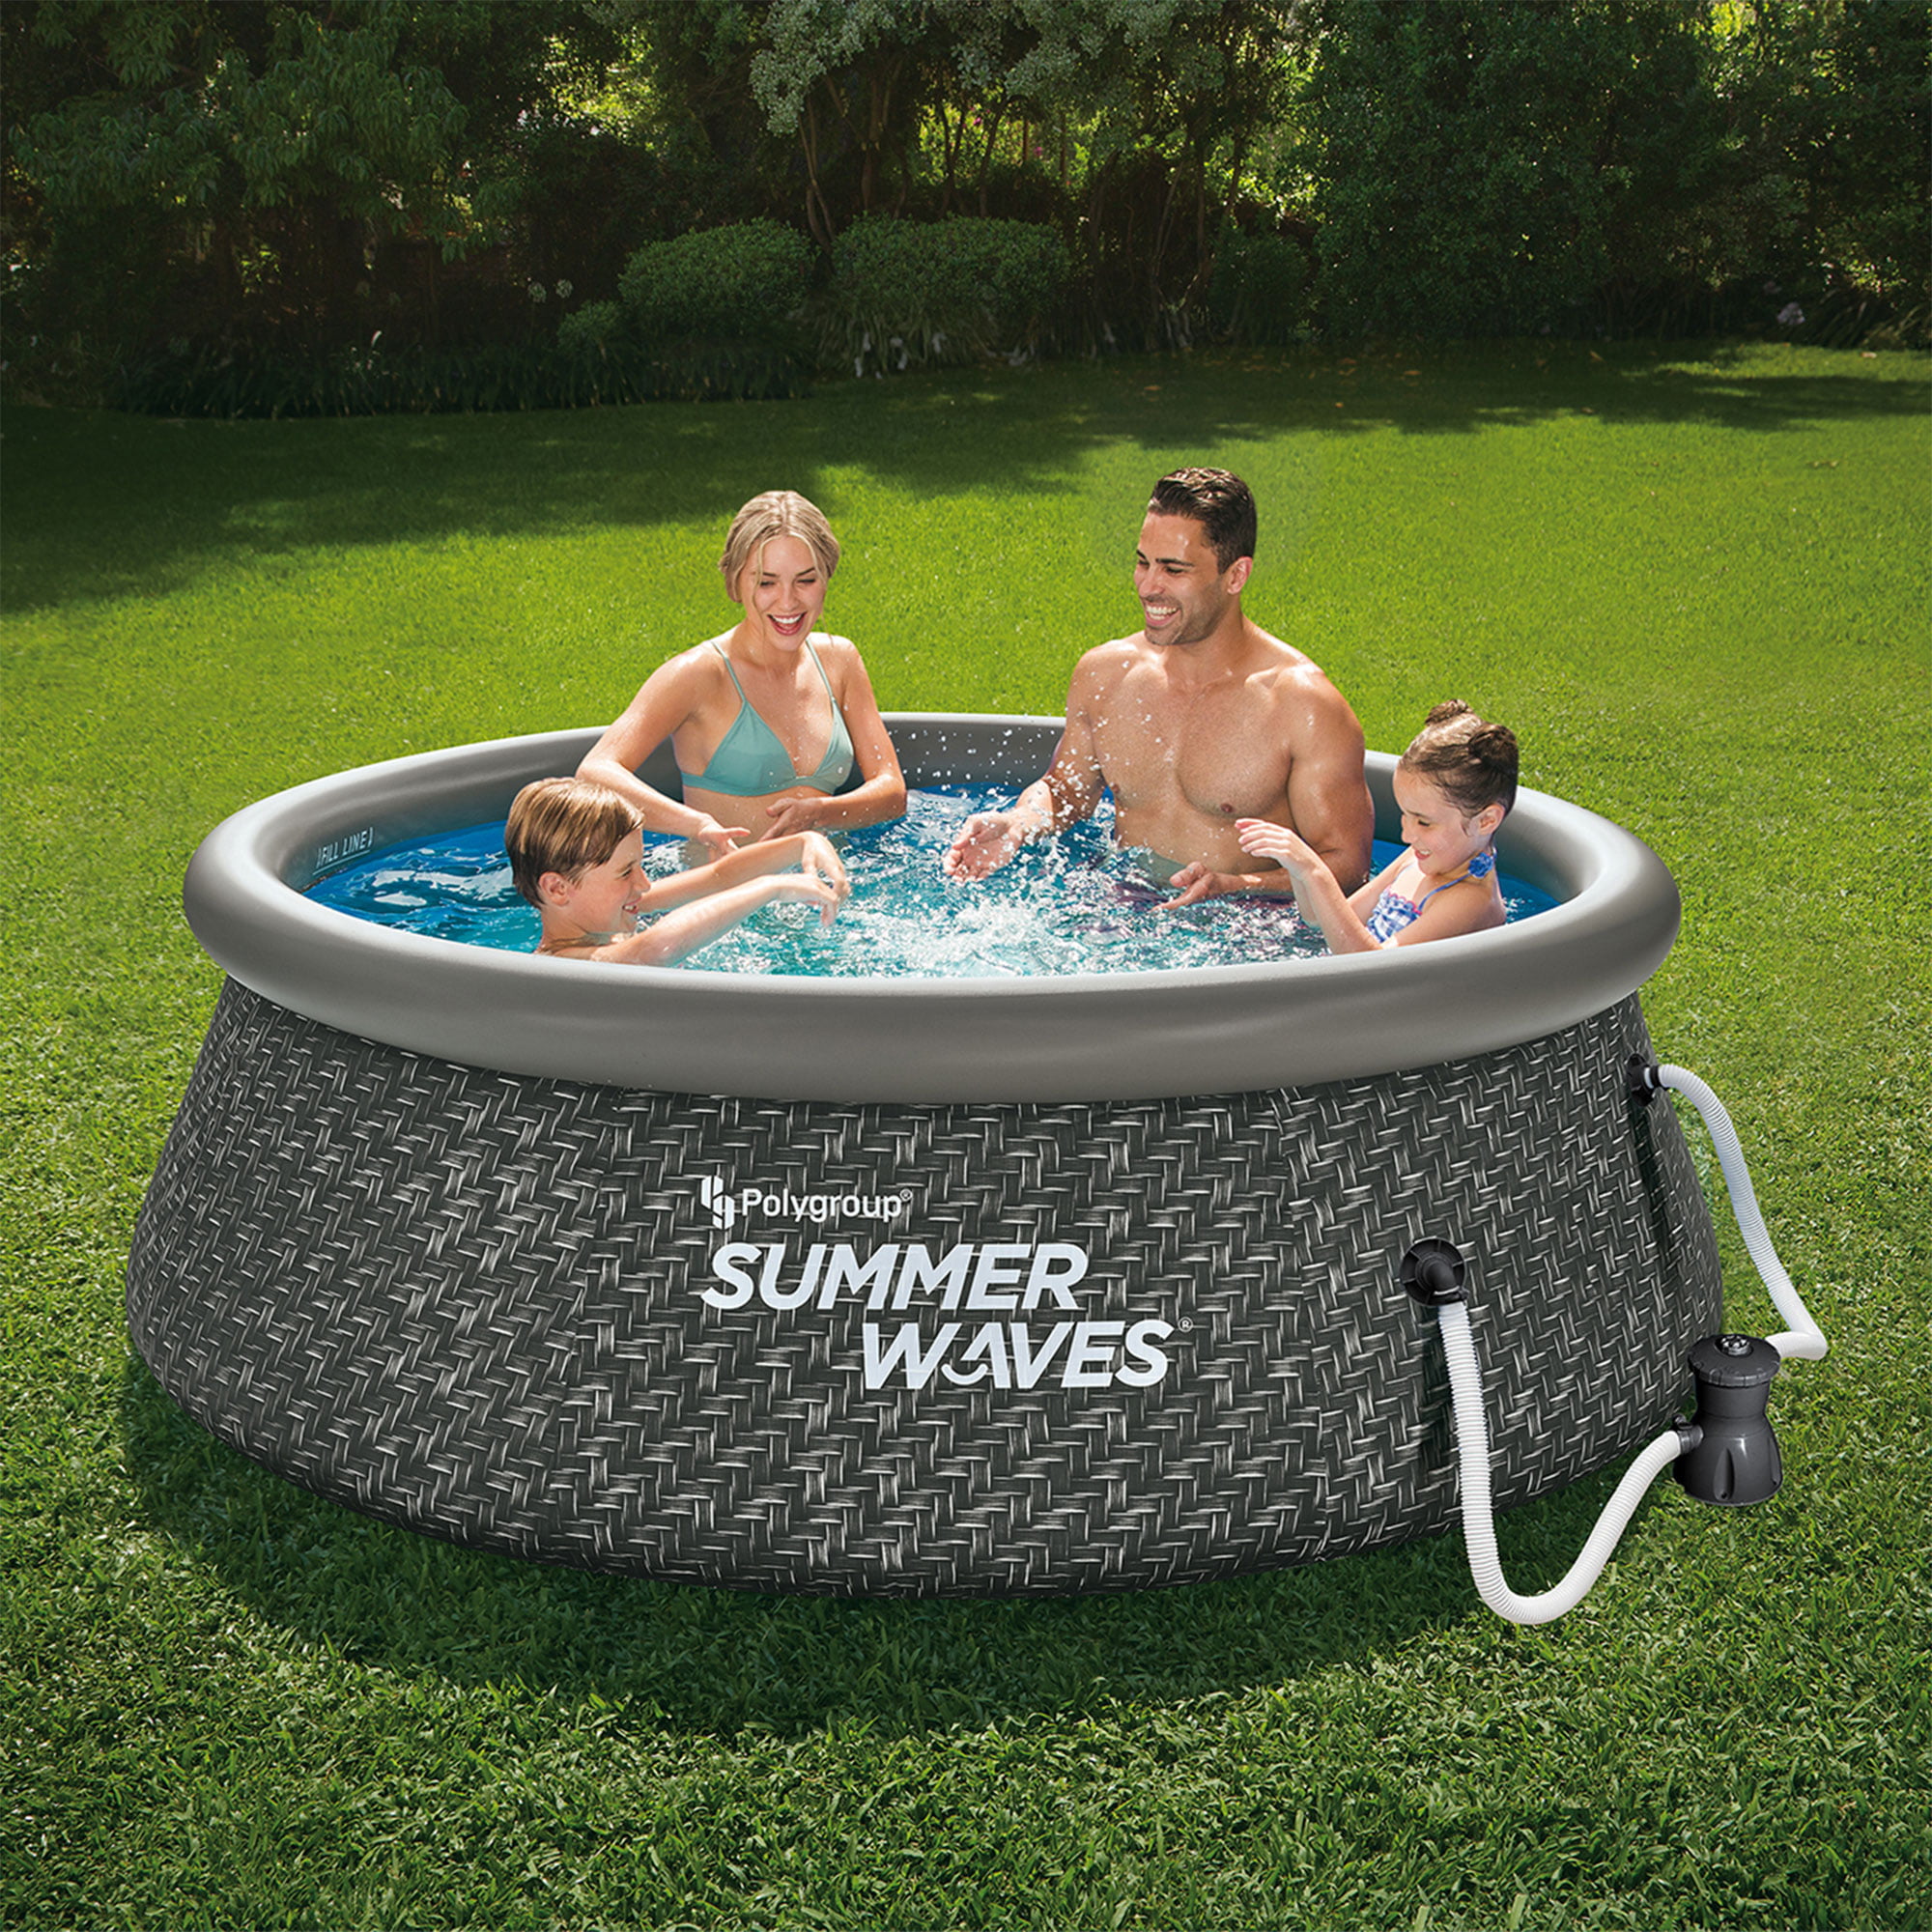 Summer Waves 8ft x 8ft x 2.5ft Inflatable Above Ground Pool with Filter Pump 